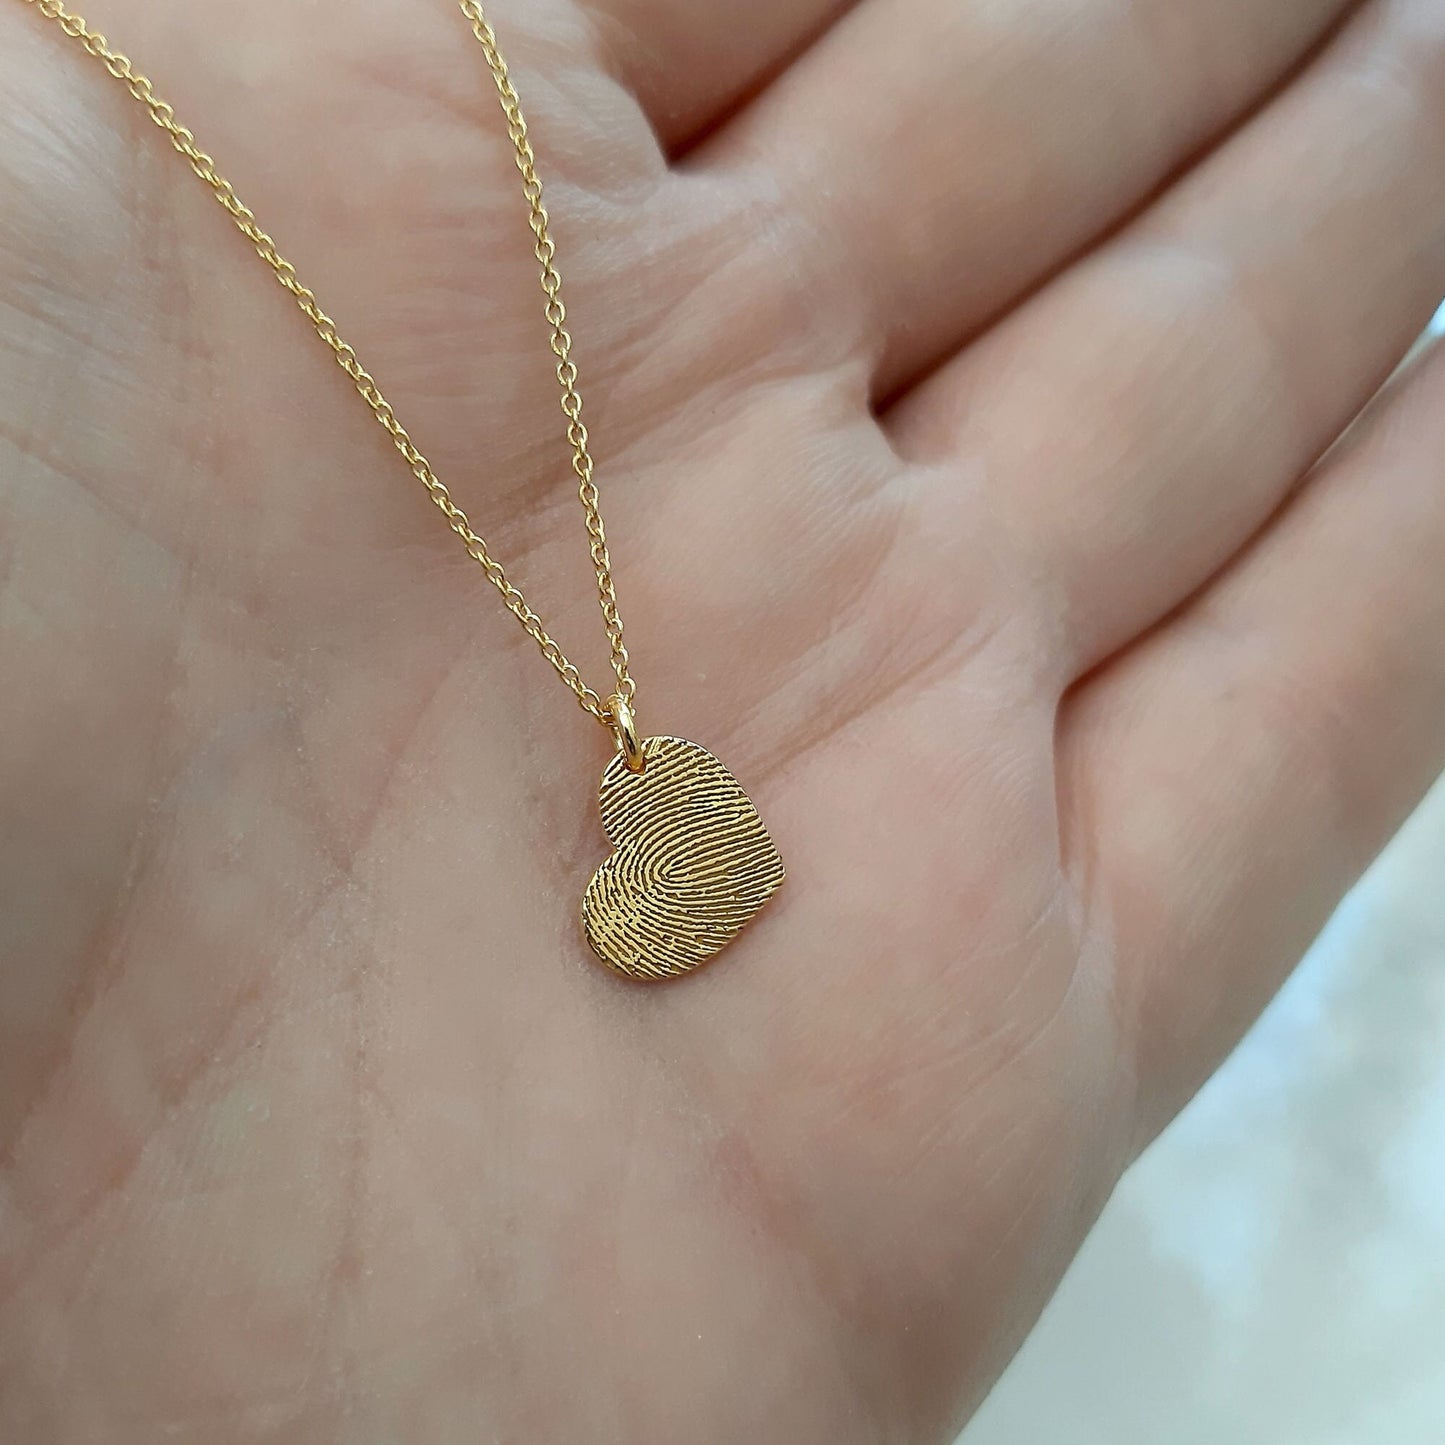 Fingerprint Necklace • Memorial Jewelry Gift • Heart Fingerprint Necklace • Actual Fingerprint Jewelry • 14k gold necklace Mother's Gift